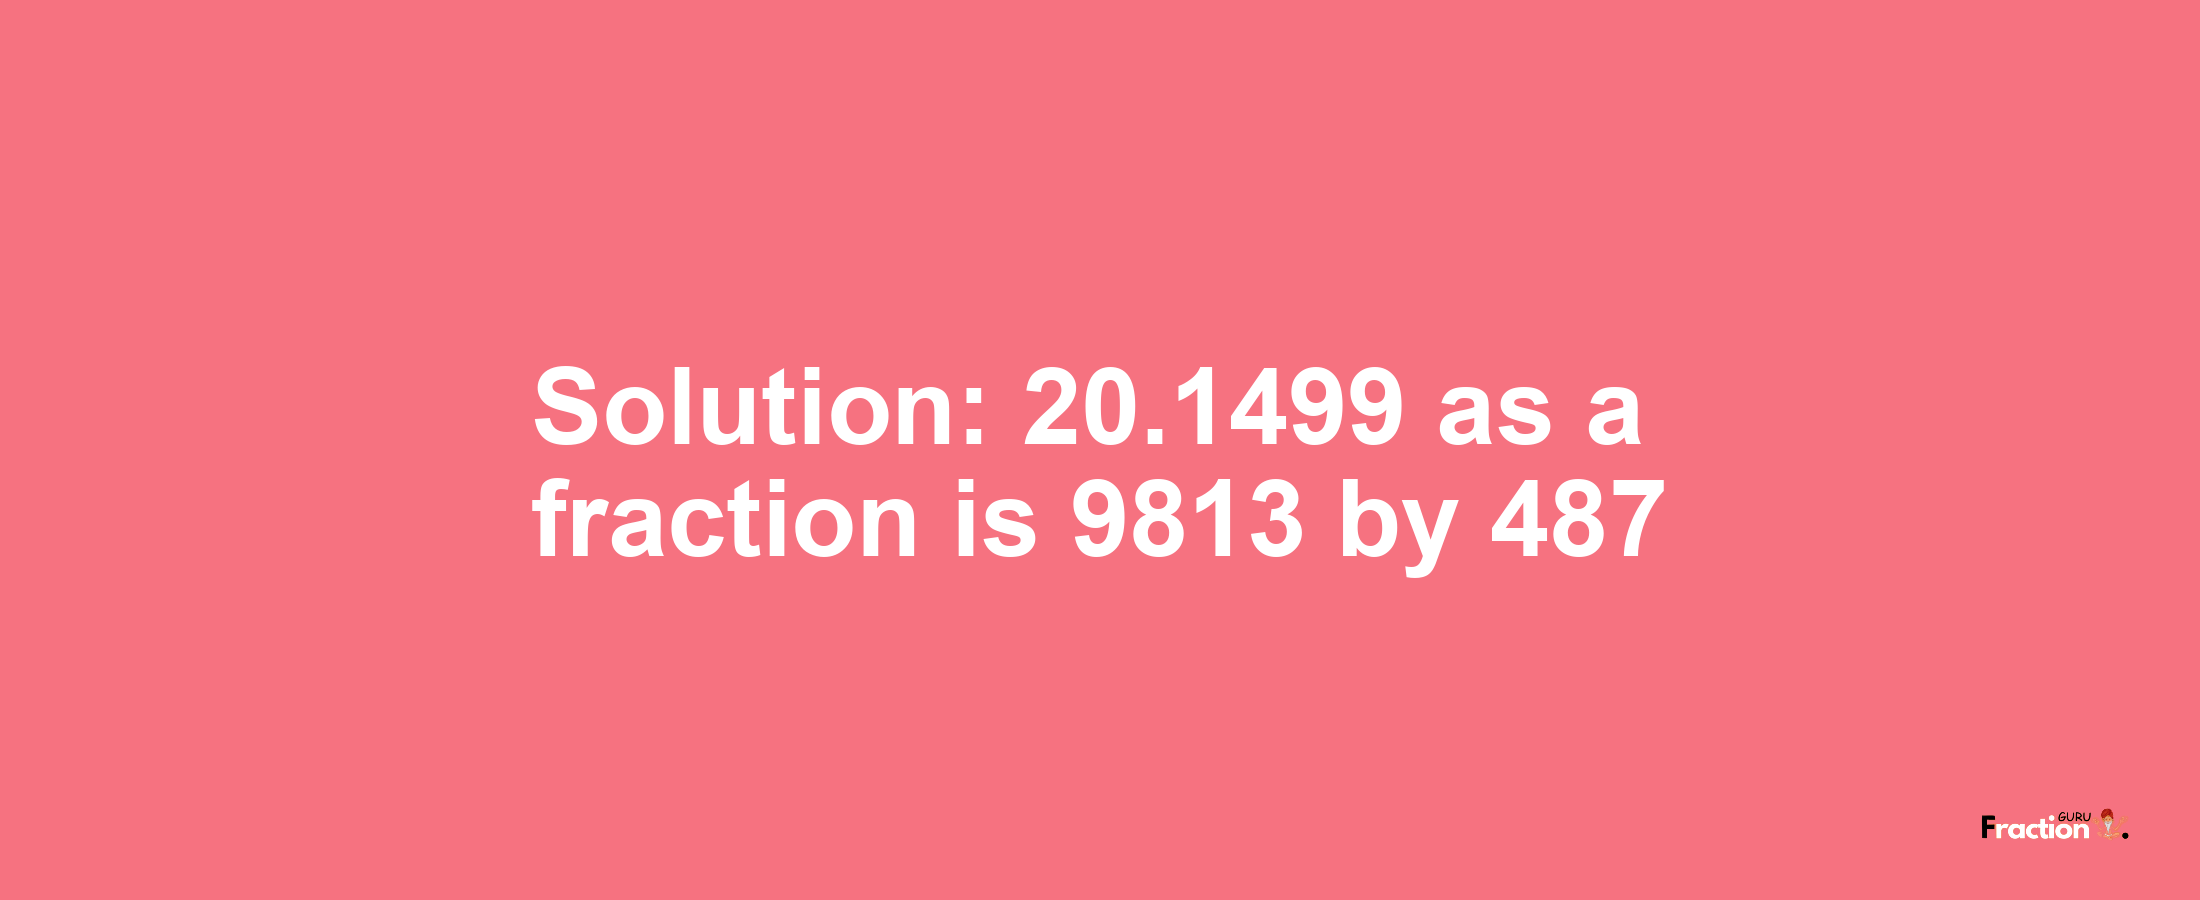 Solution:20.1499 as a fraction is 9813/487